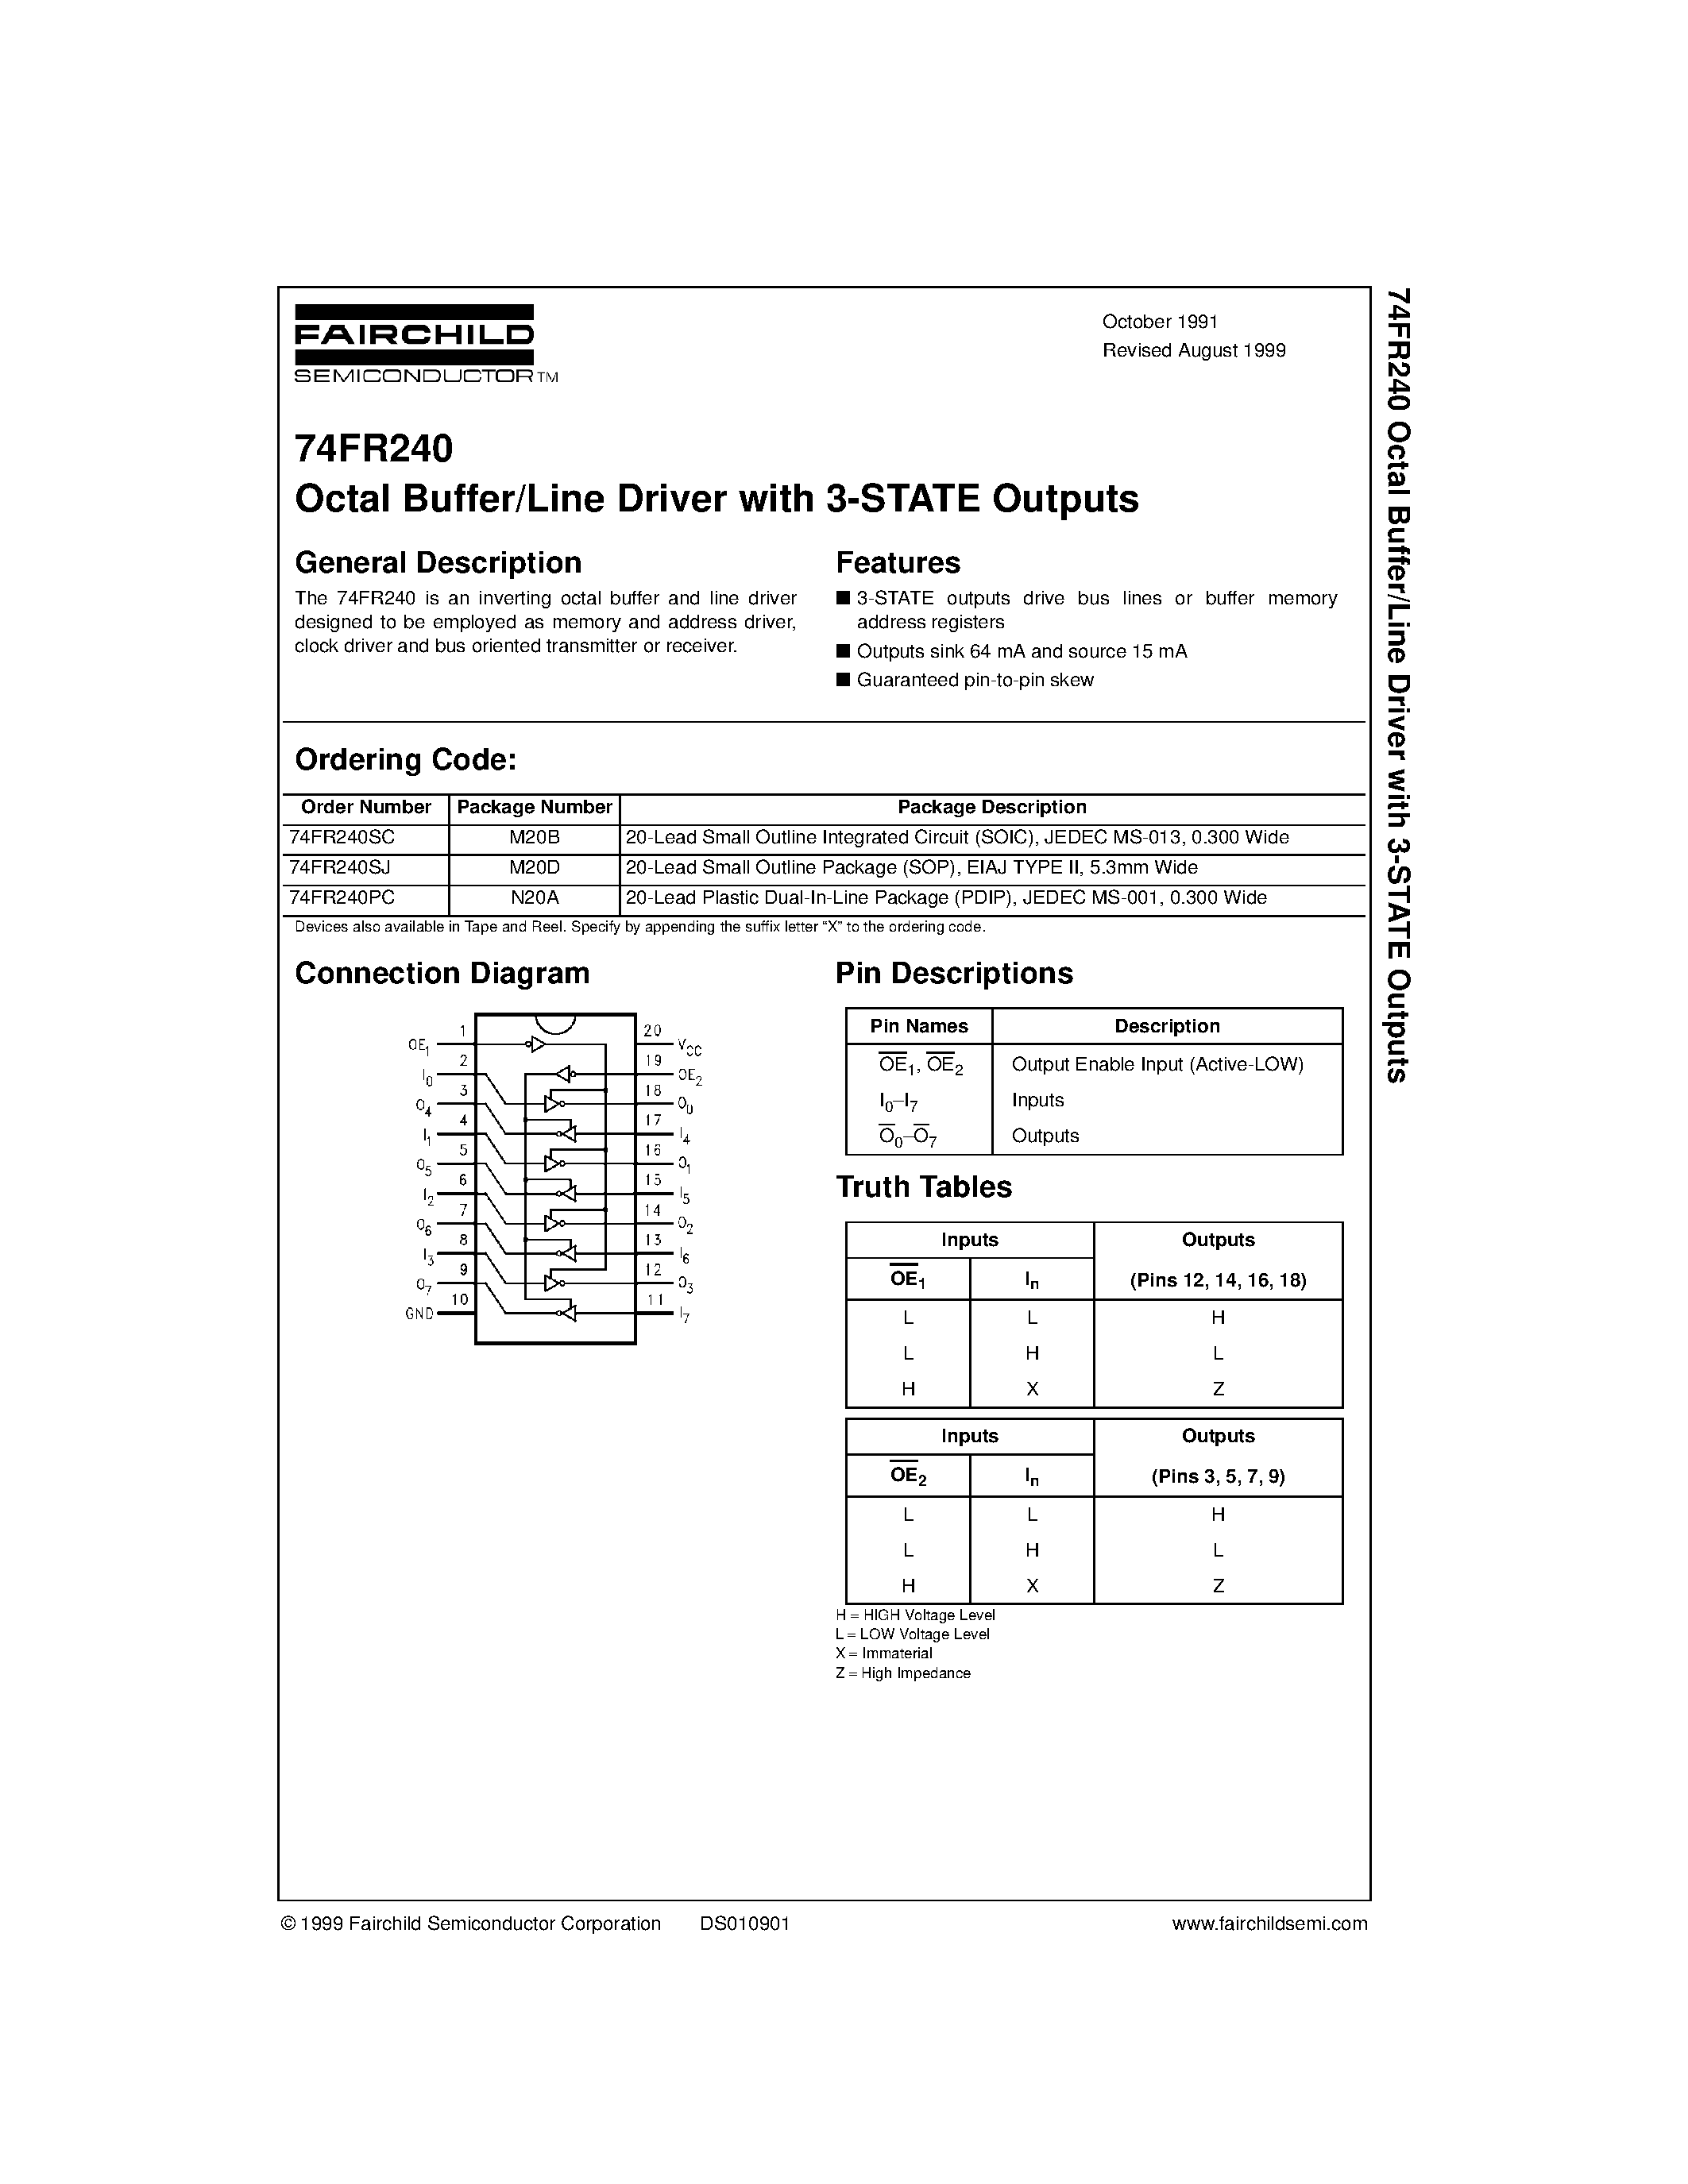 Datasheet 74FR240PC - Octal Buffer/Line Driver with 3-STATE Outputs page 1